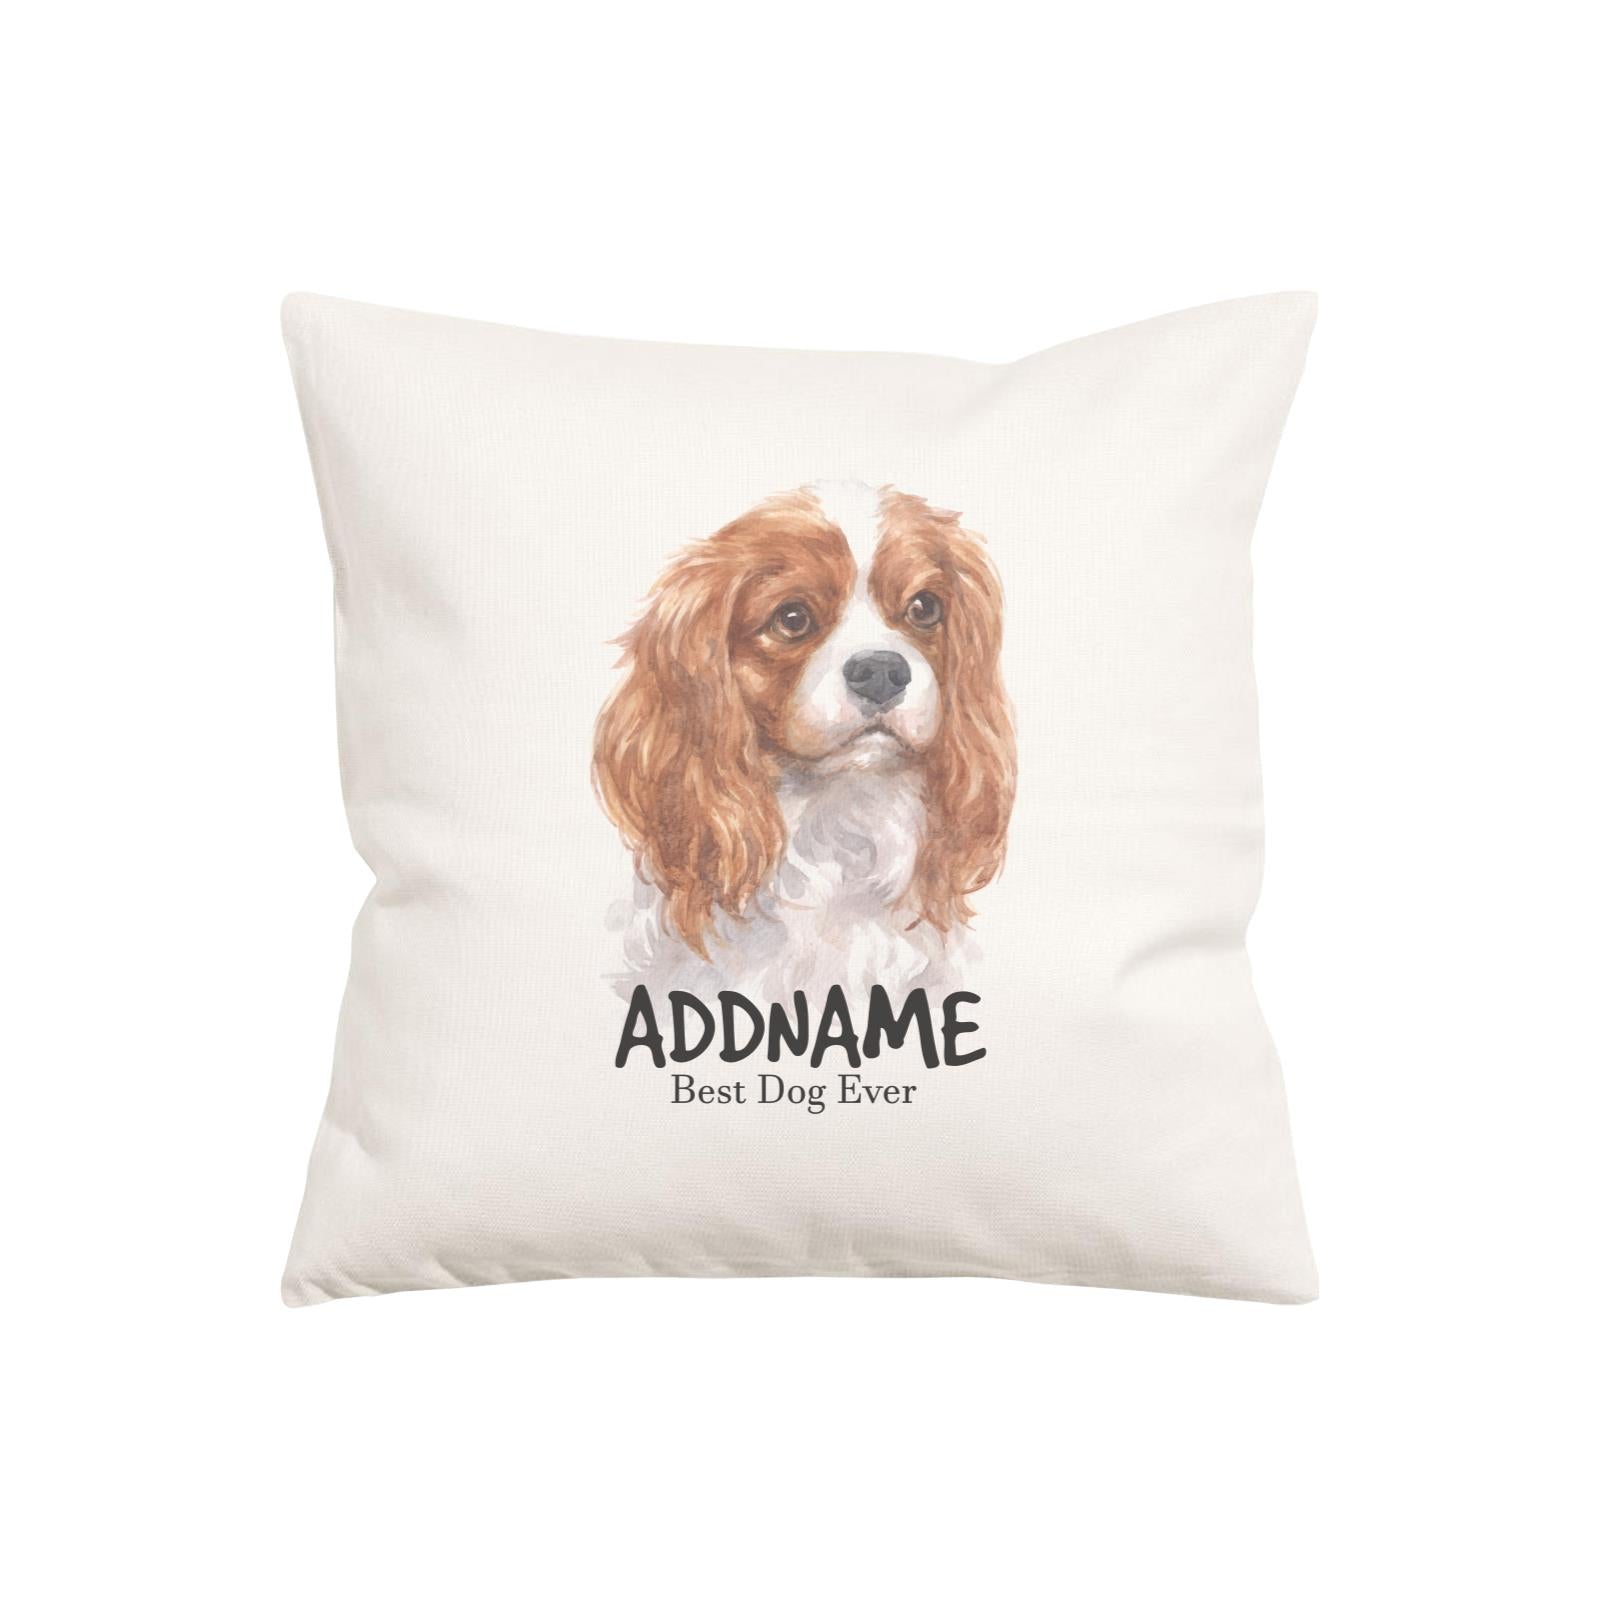 Watercolor Dog Series King Charles Spaniel Curly Best Dog Ever Addname Pillow Cushion